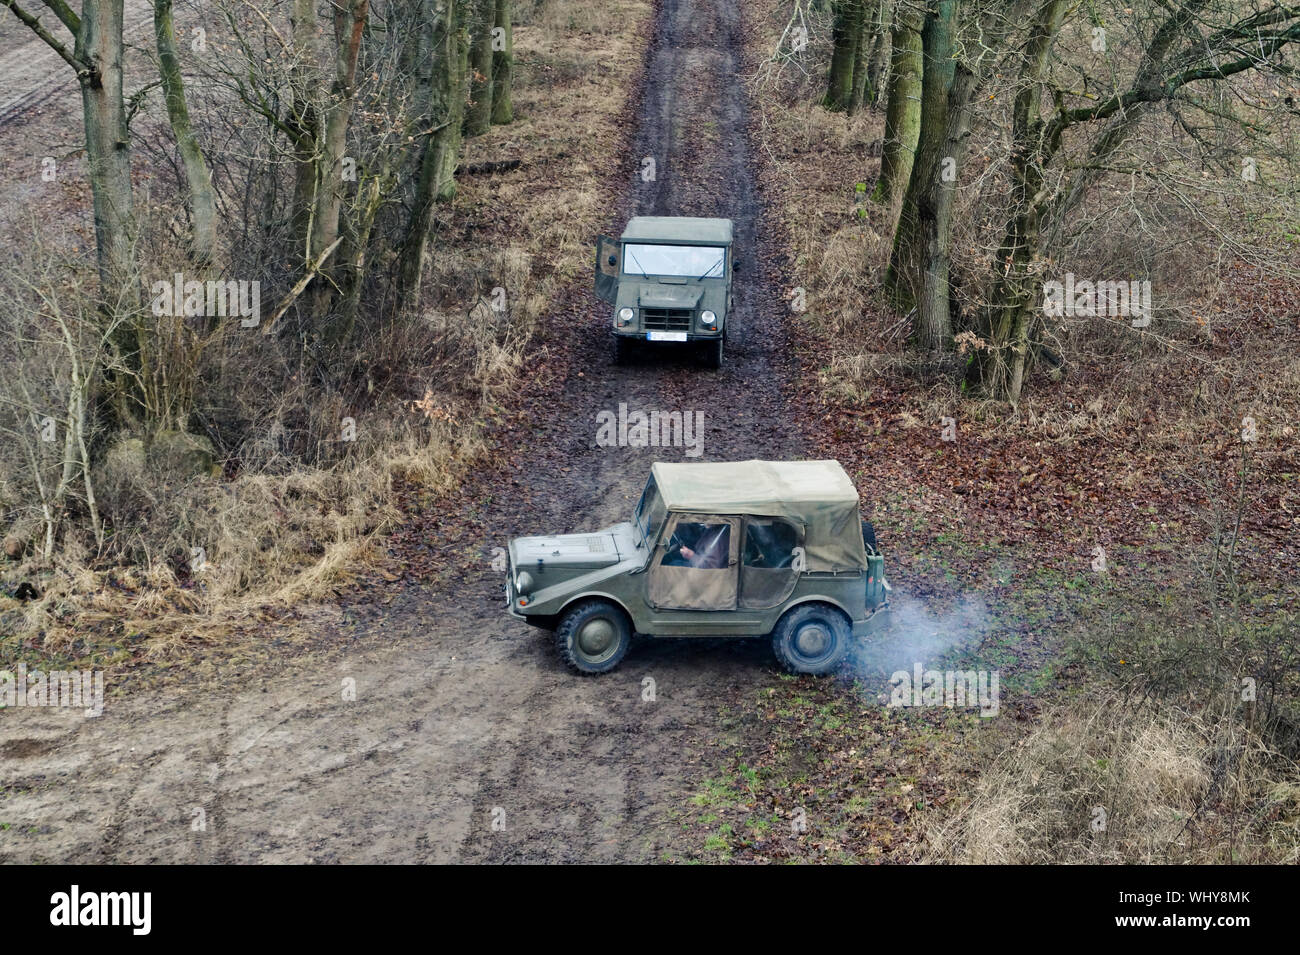 High Angle View Of Off-road Vehicles In Forest Stock Photo